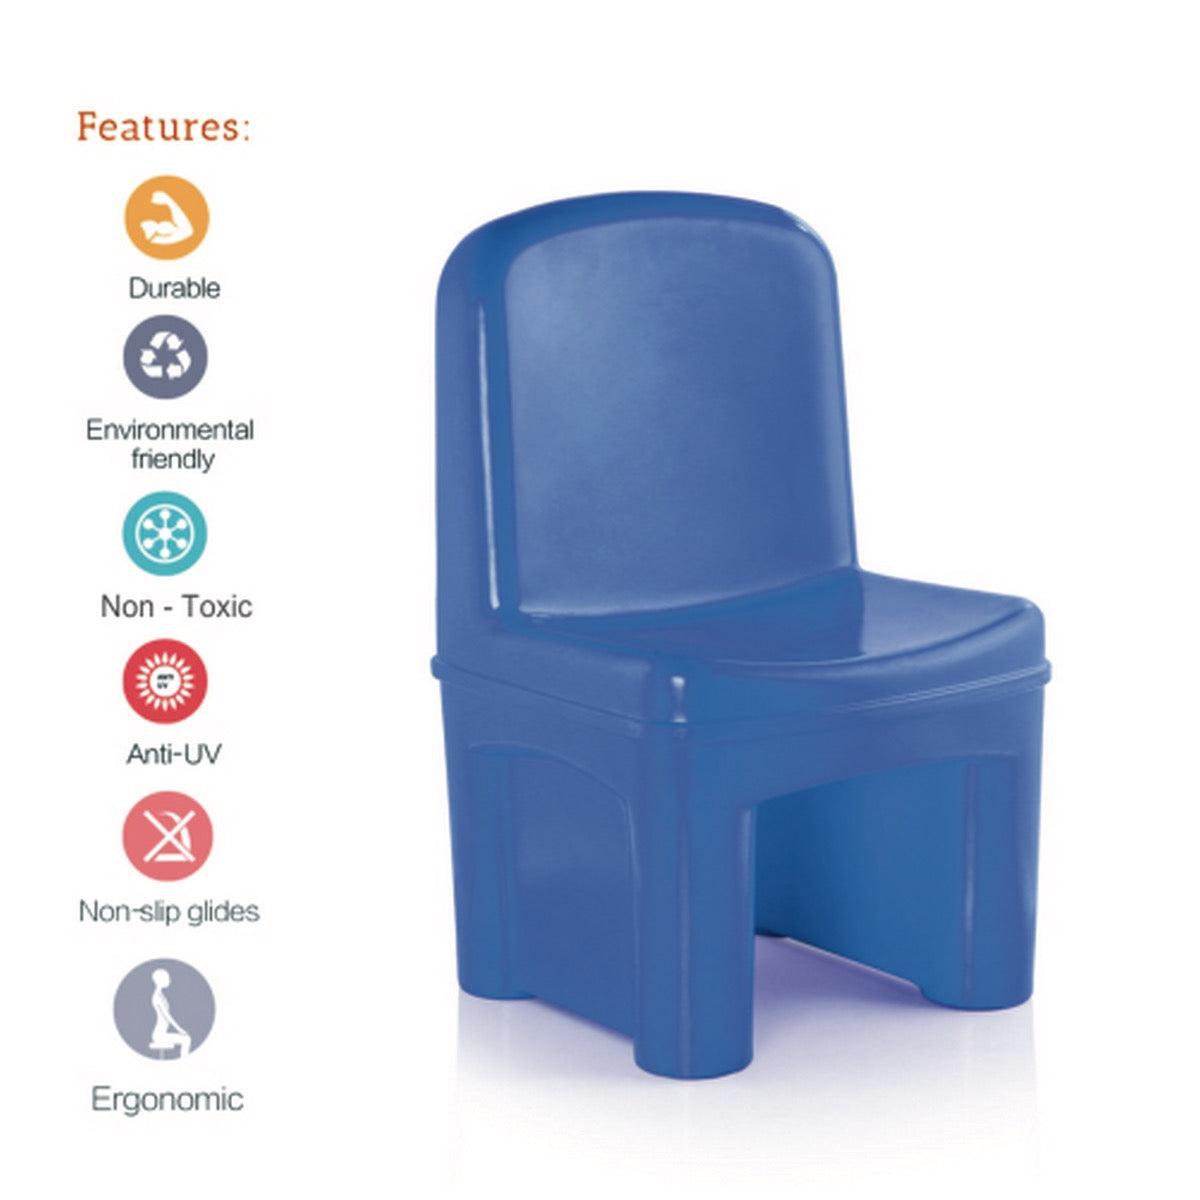 Ok Play Master Seat Chair For Little Kids, Perfect For Home And School, Blue, 2 to 4 Years